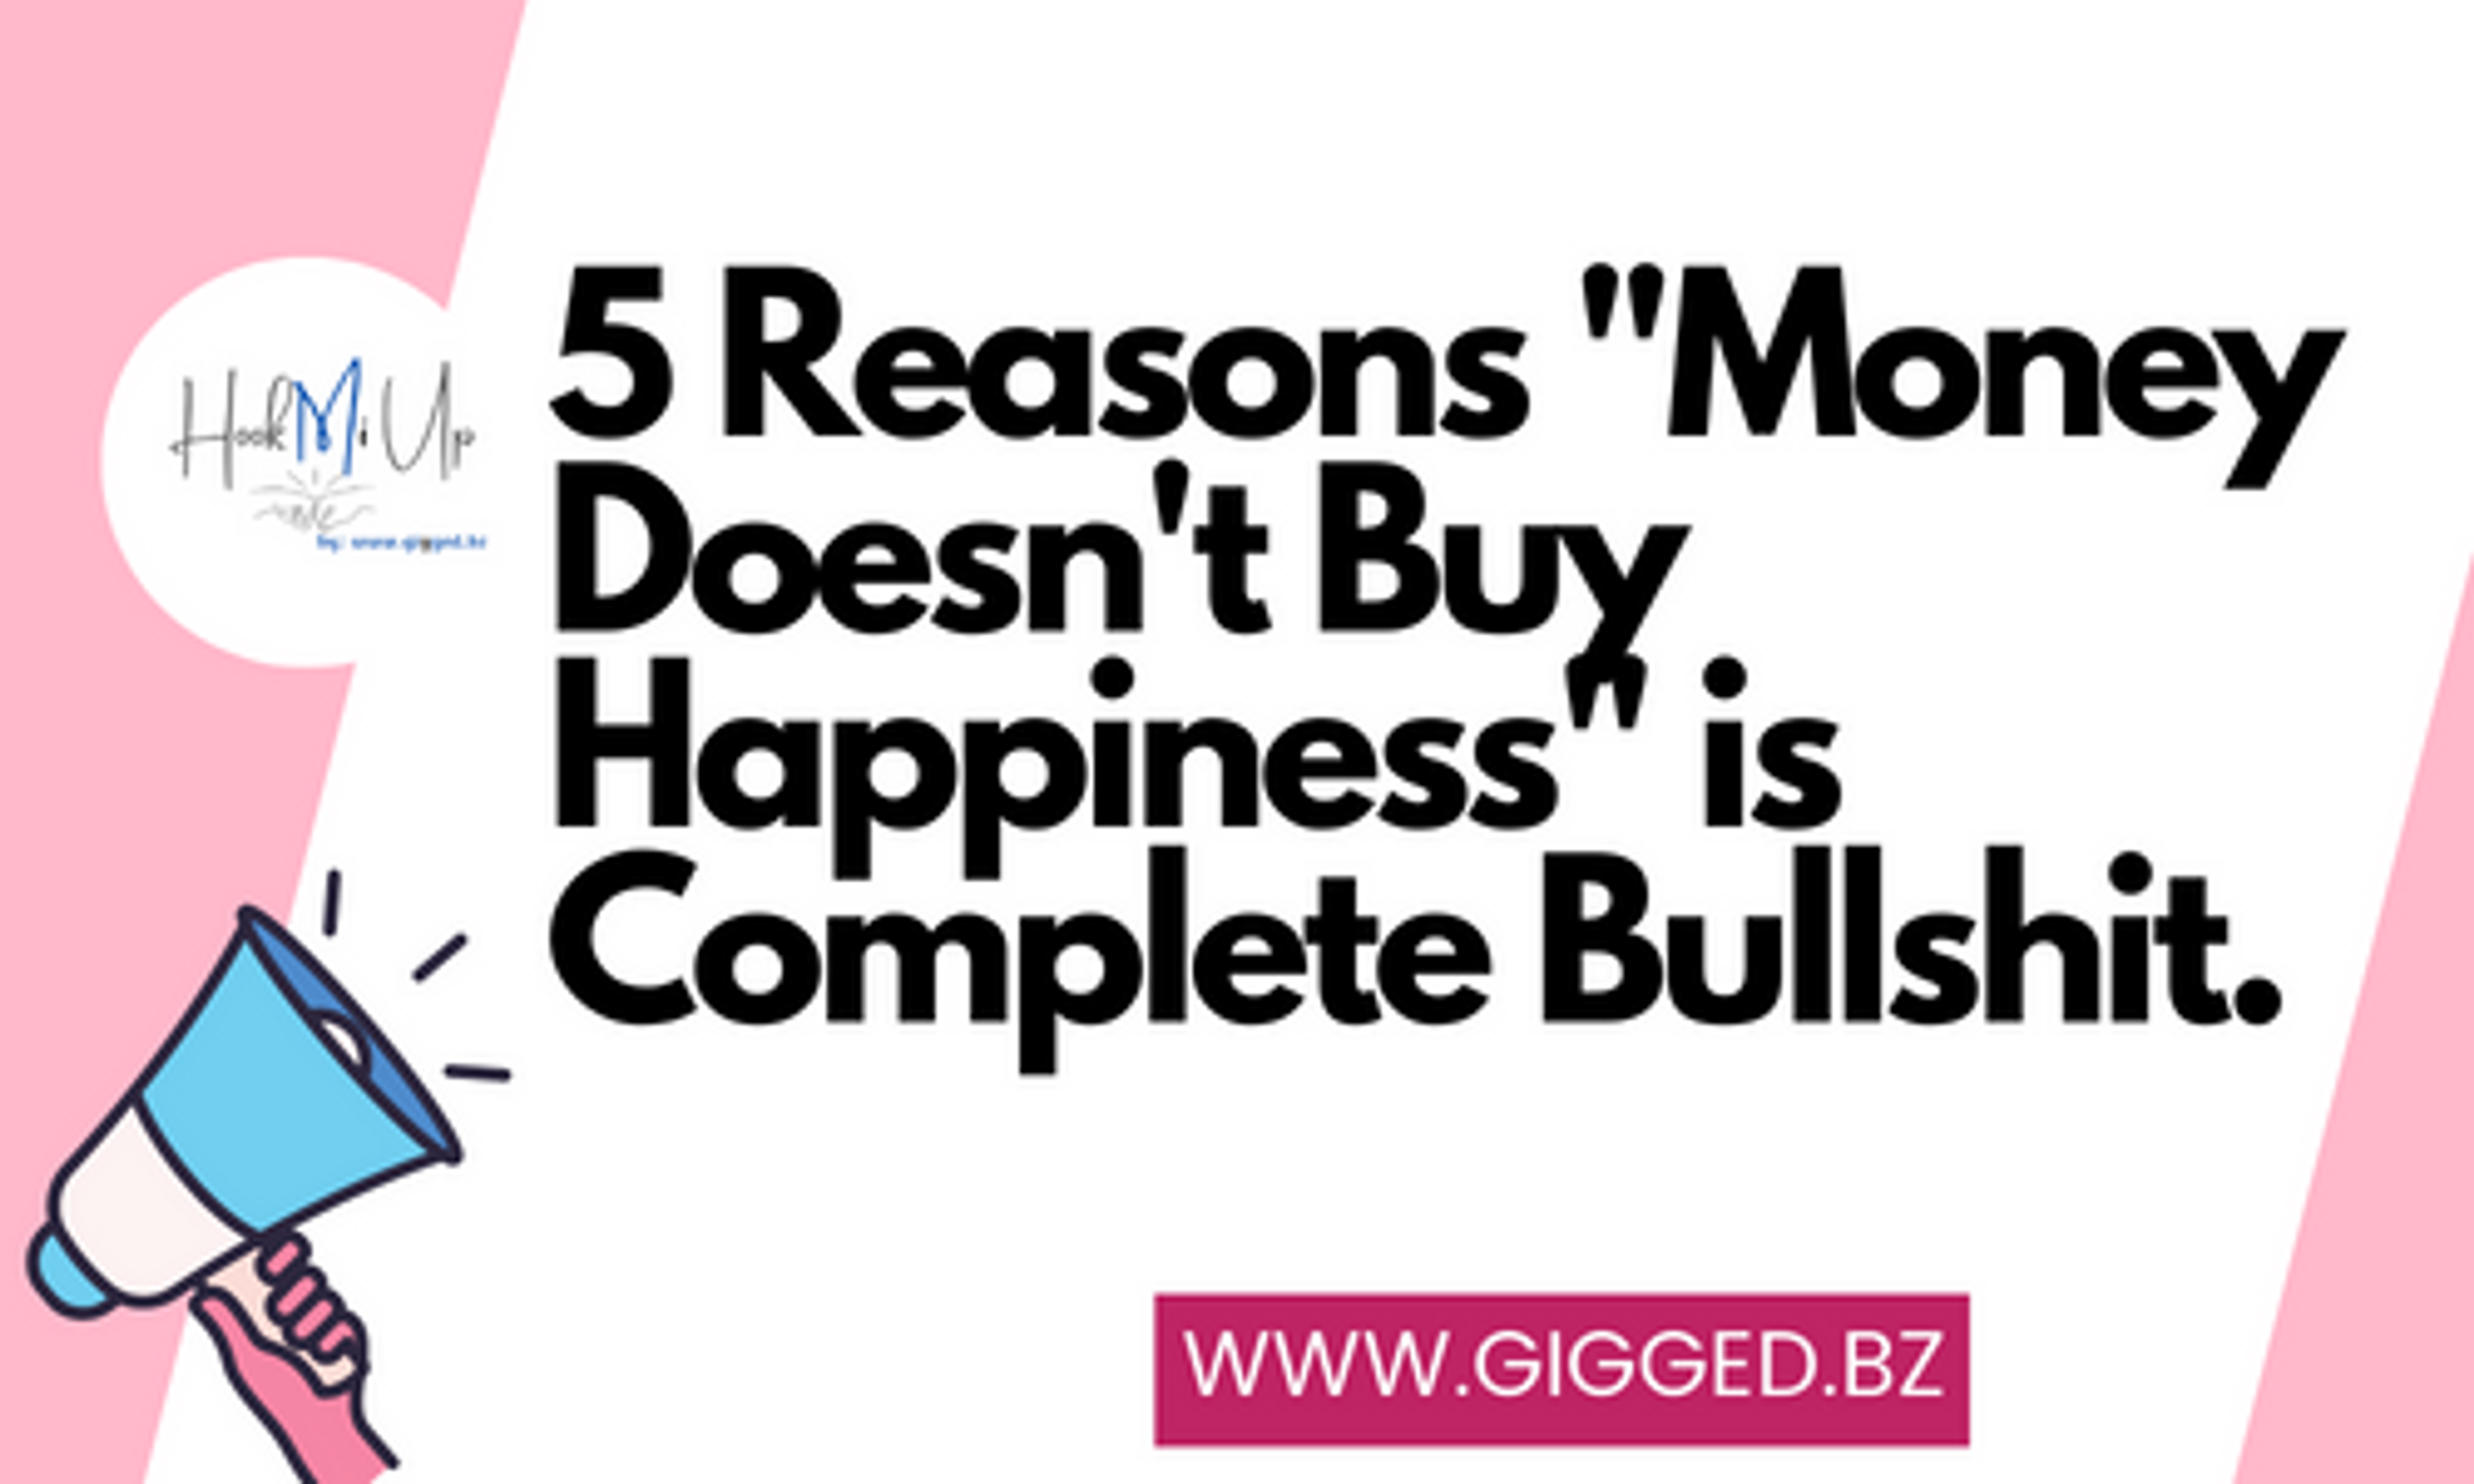 5 Reasons "Money Doesn't Buy Happiness" is Complete Bullshit